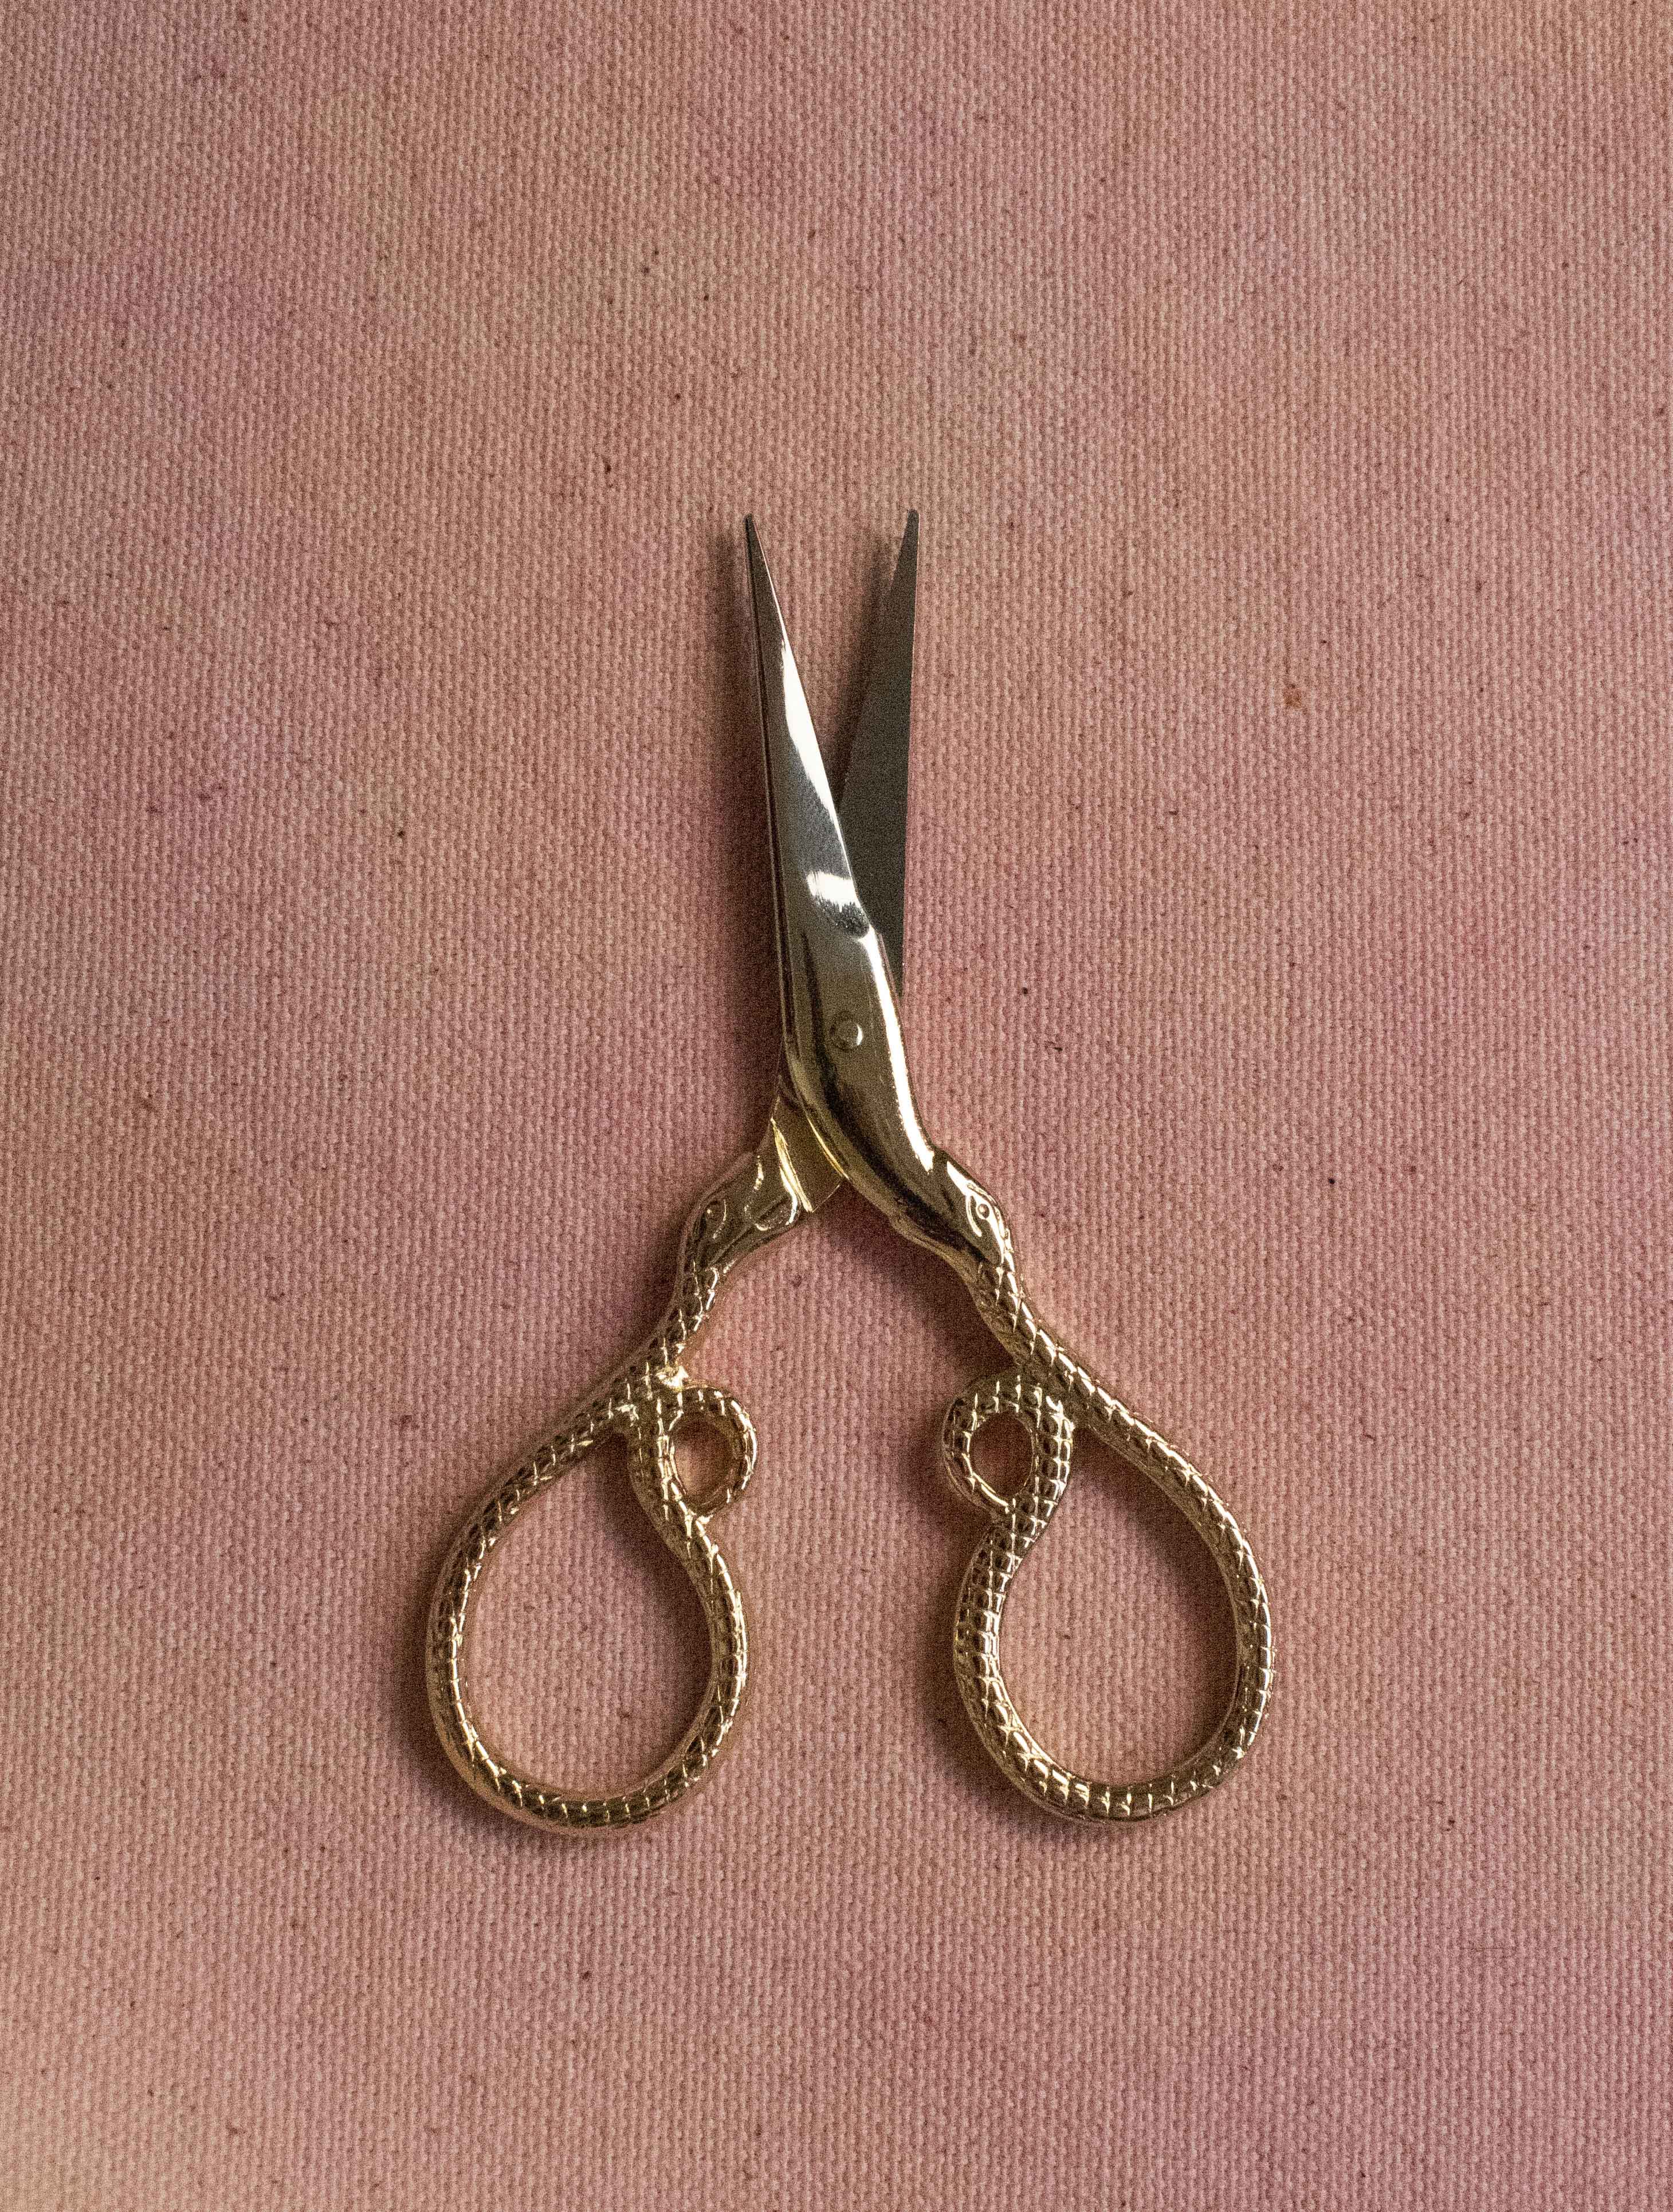 VINTAGE 3 1/2 TINY STORK EMBROIDERY SCISSORS JAPAN MADE W/SHEATH FREE  SHIPPING